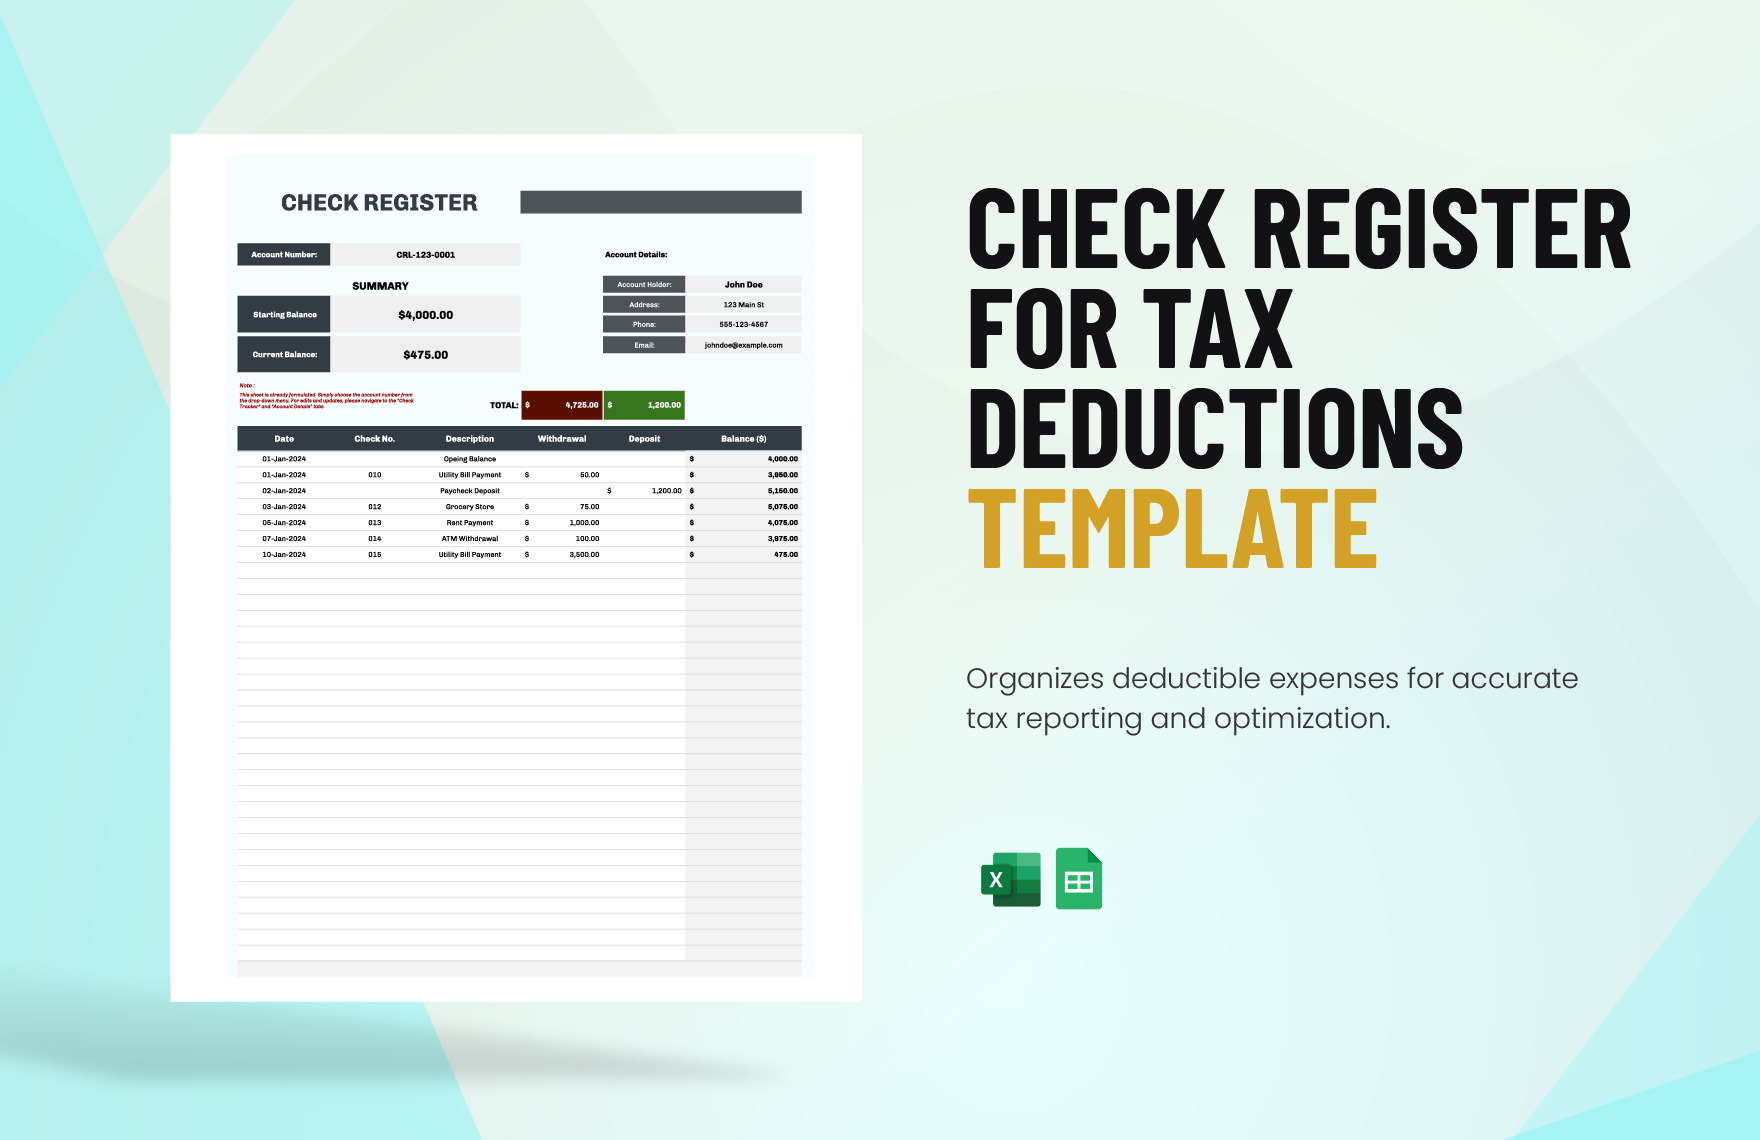 Check Register for Tax Deductions Template in Excel, Google Sheets